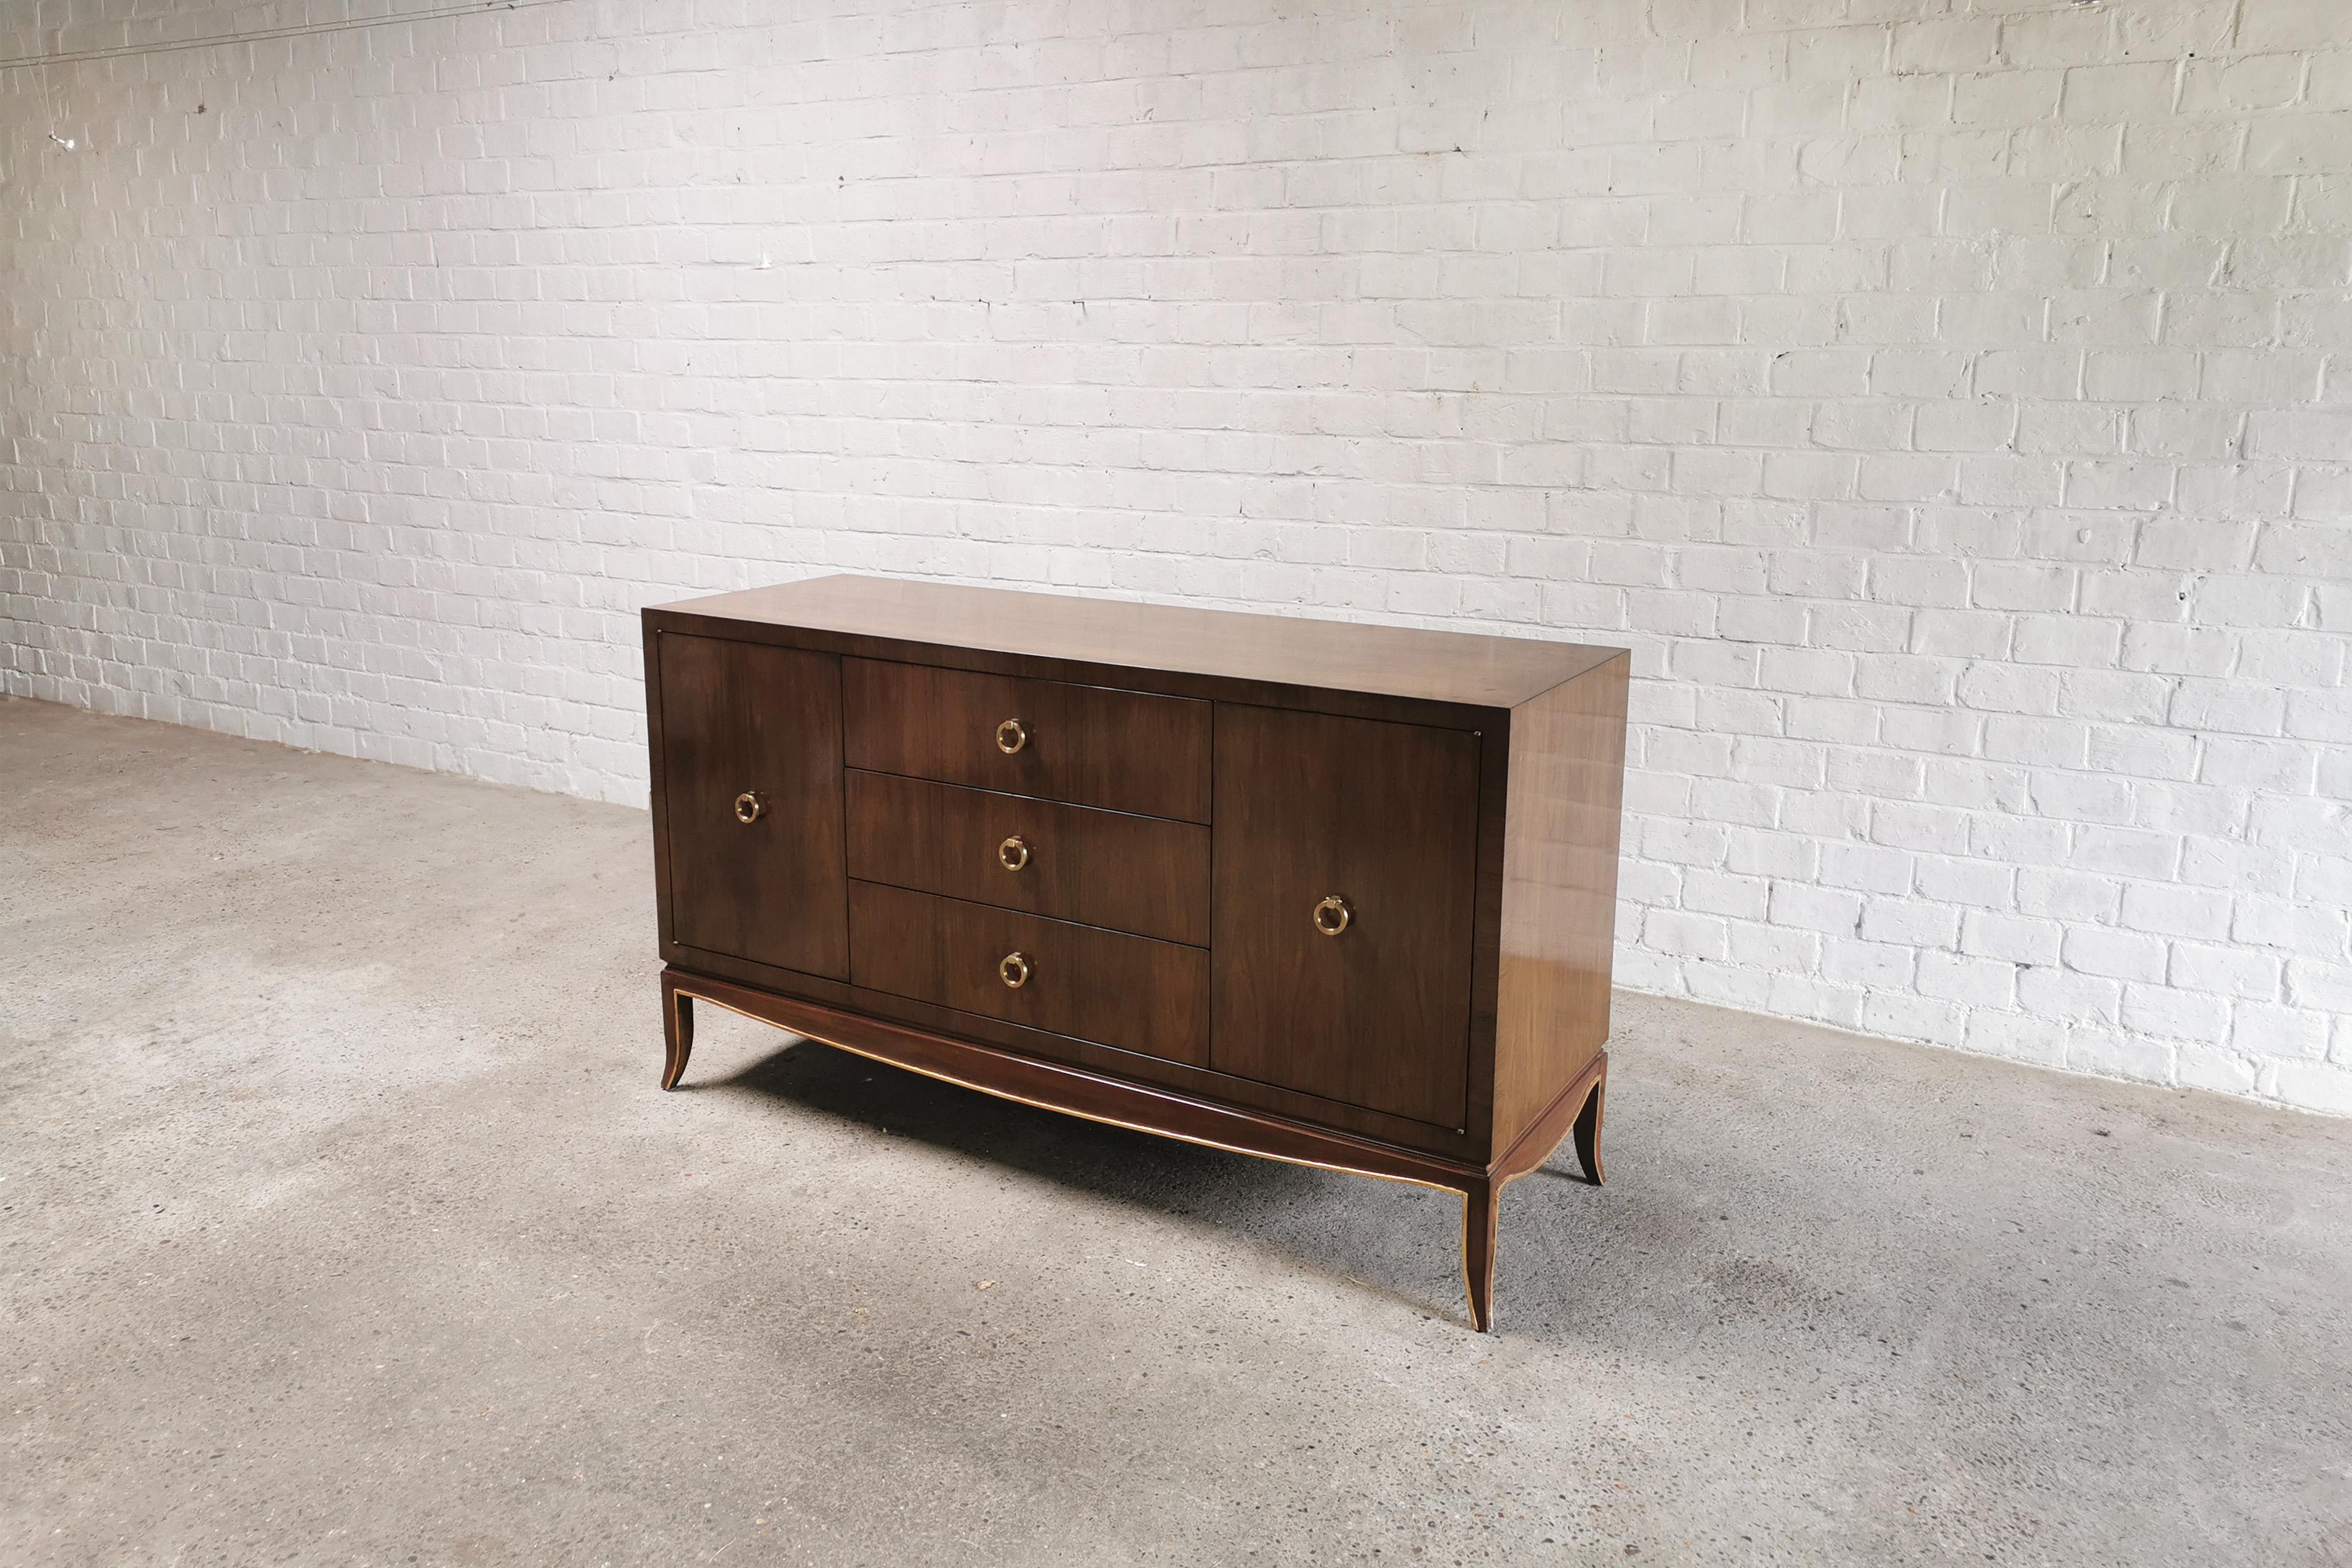 A french stained mahagony sideboard with brass handles, work from the late 20th century. The design is clearly a nod to Jules Leleu's designs and to the Art-Deco period of the 1920's. Impeccable qualitative craftmanship with a beautiful shine to the